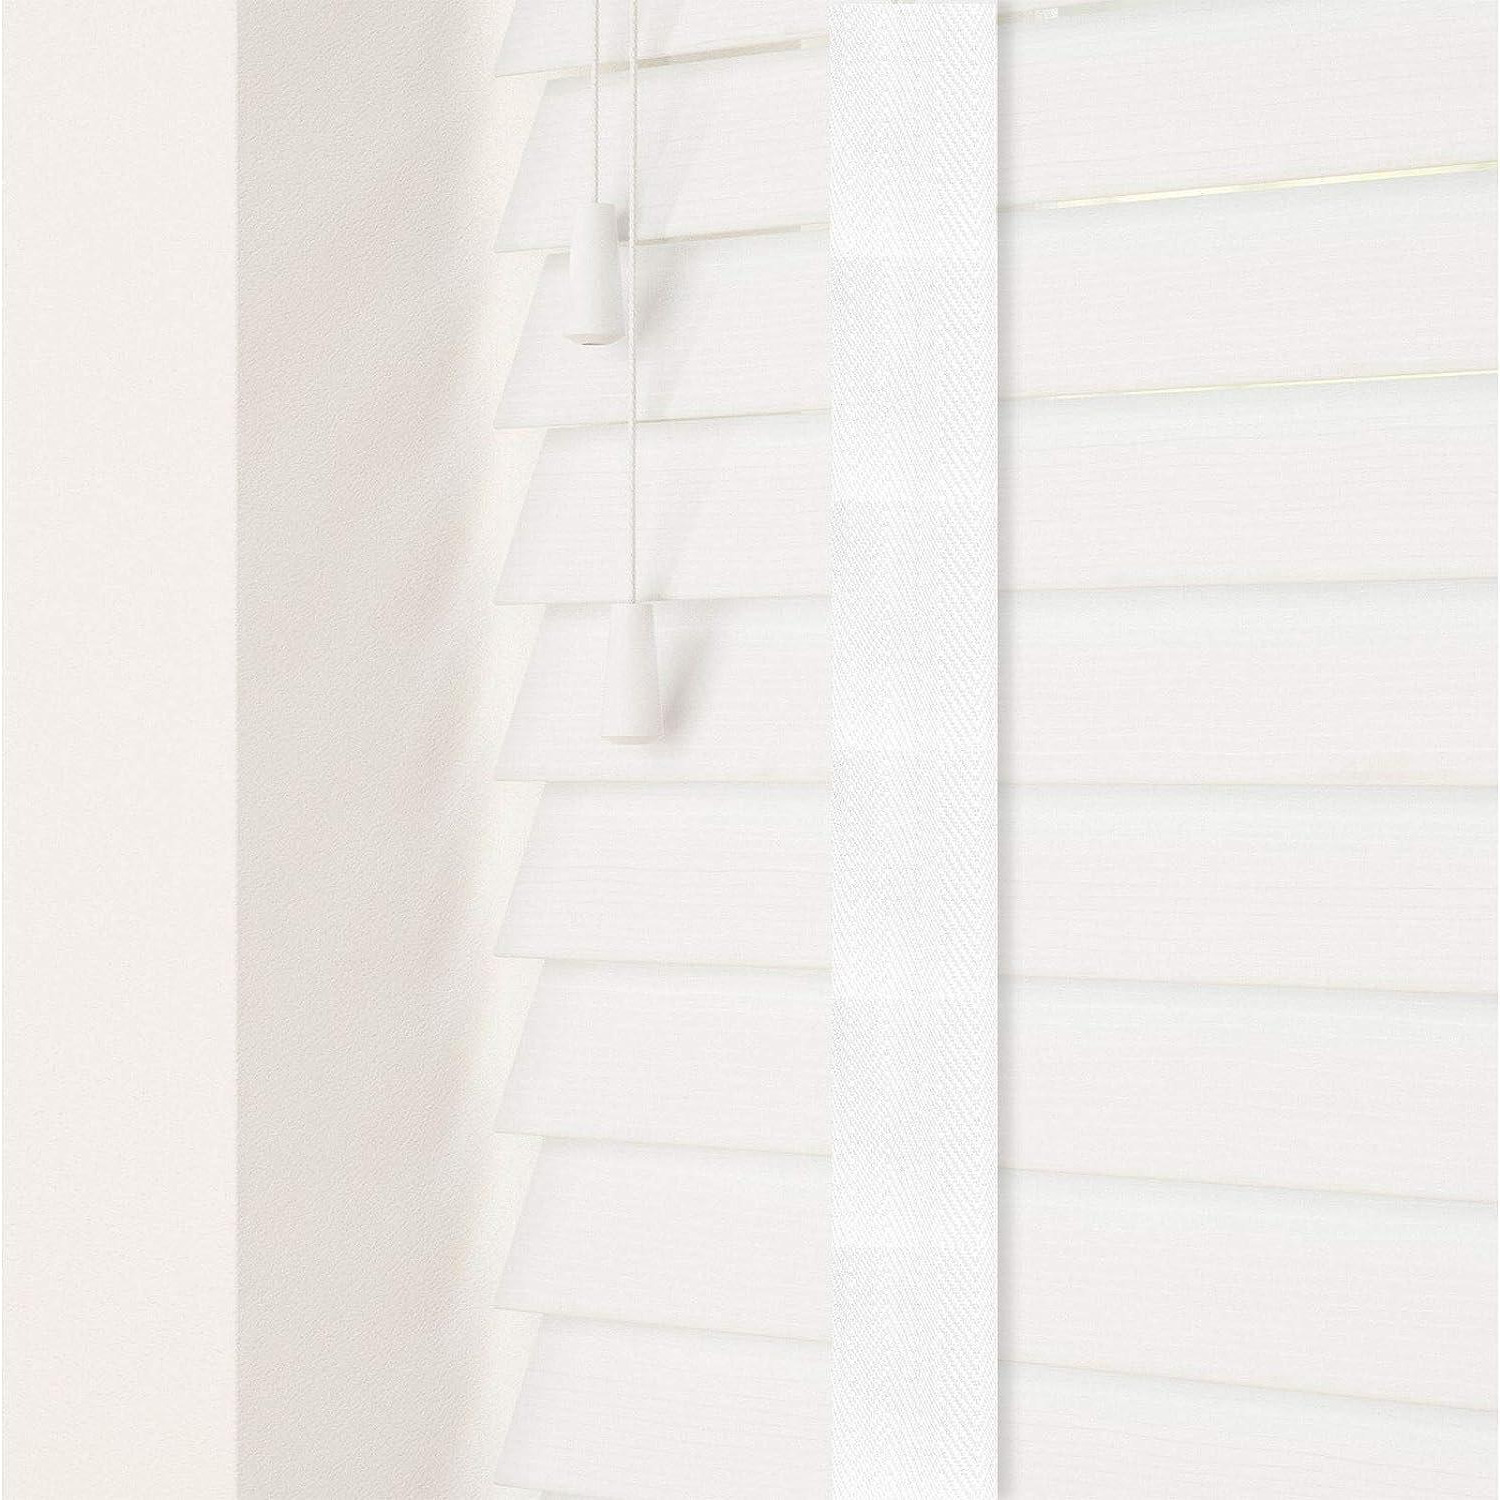 Faux Wood Venetian Blinds with Tapes